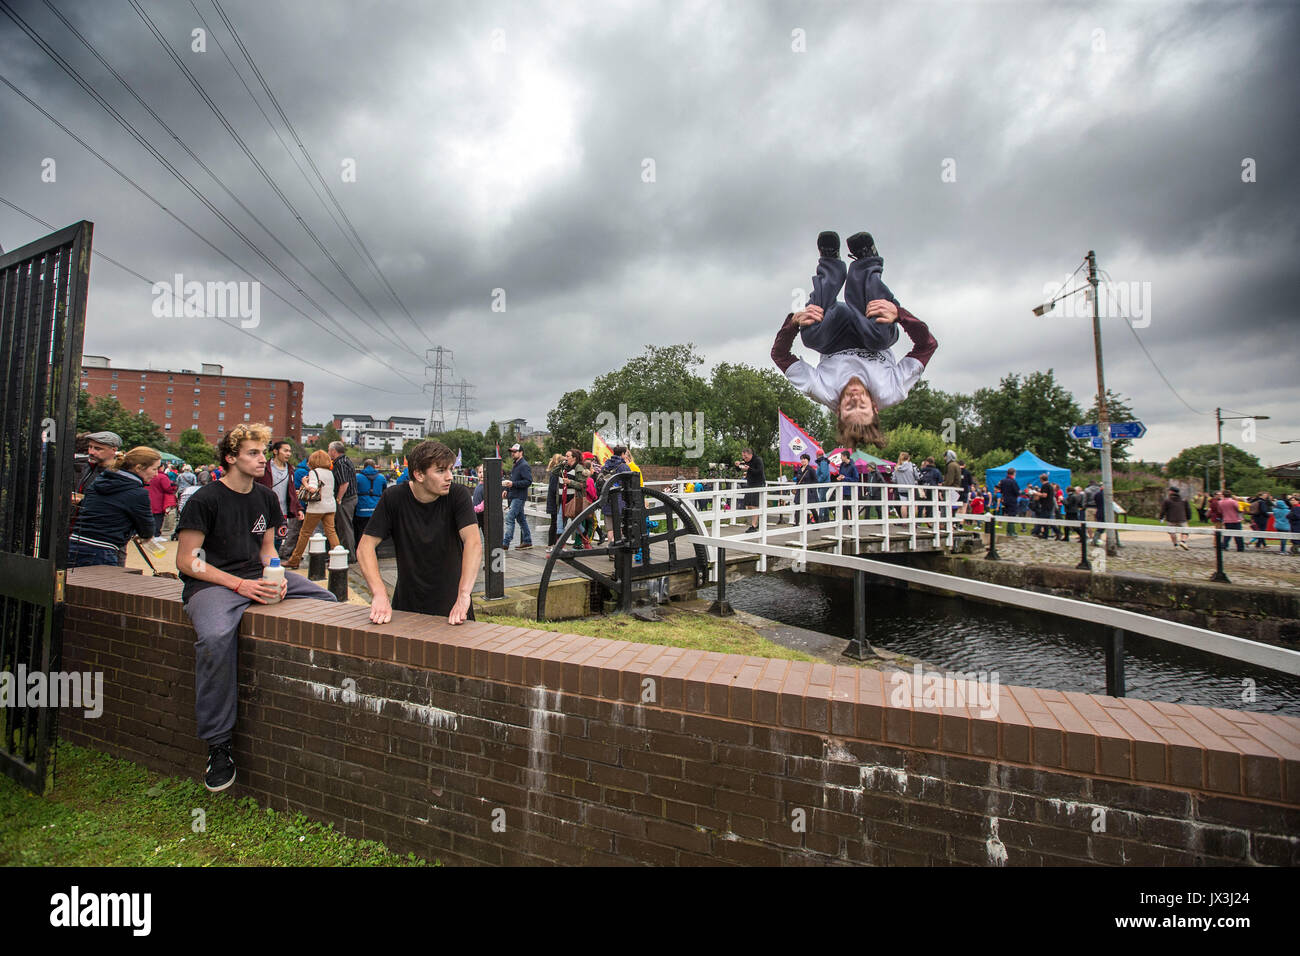 Boys and young men doing parkour Stock Photo